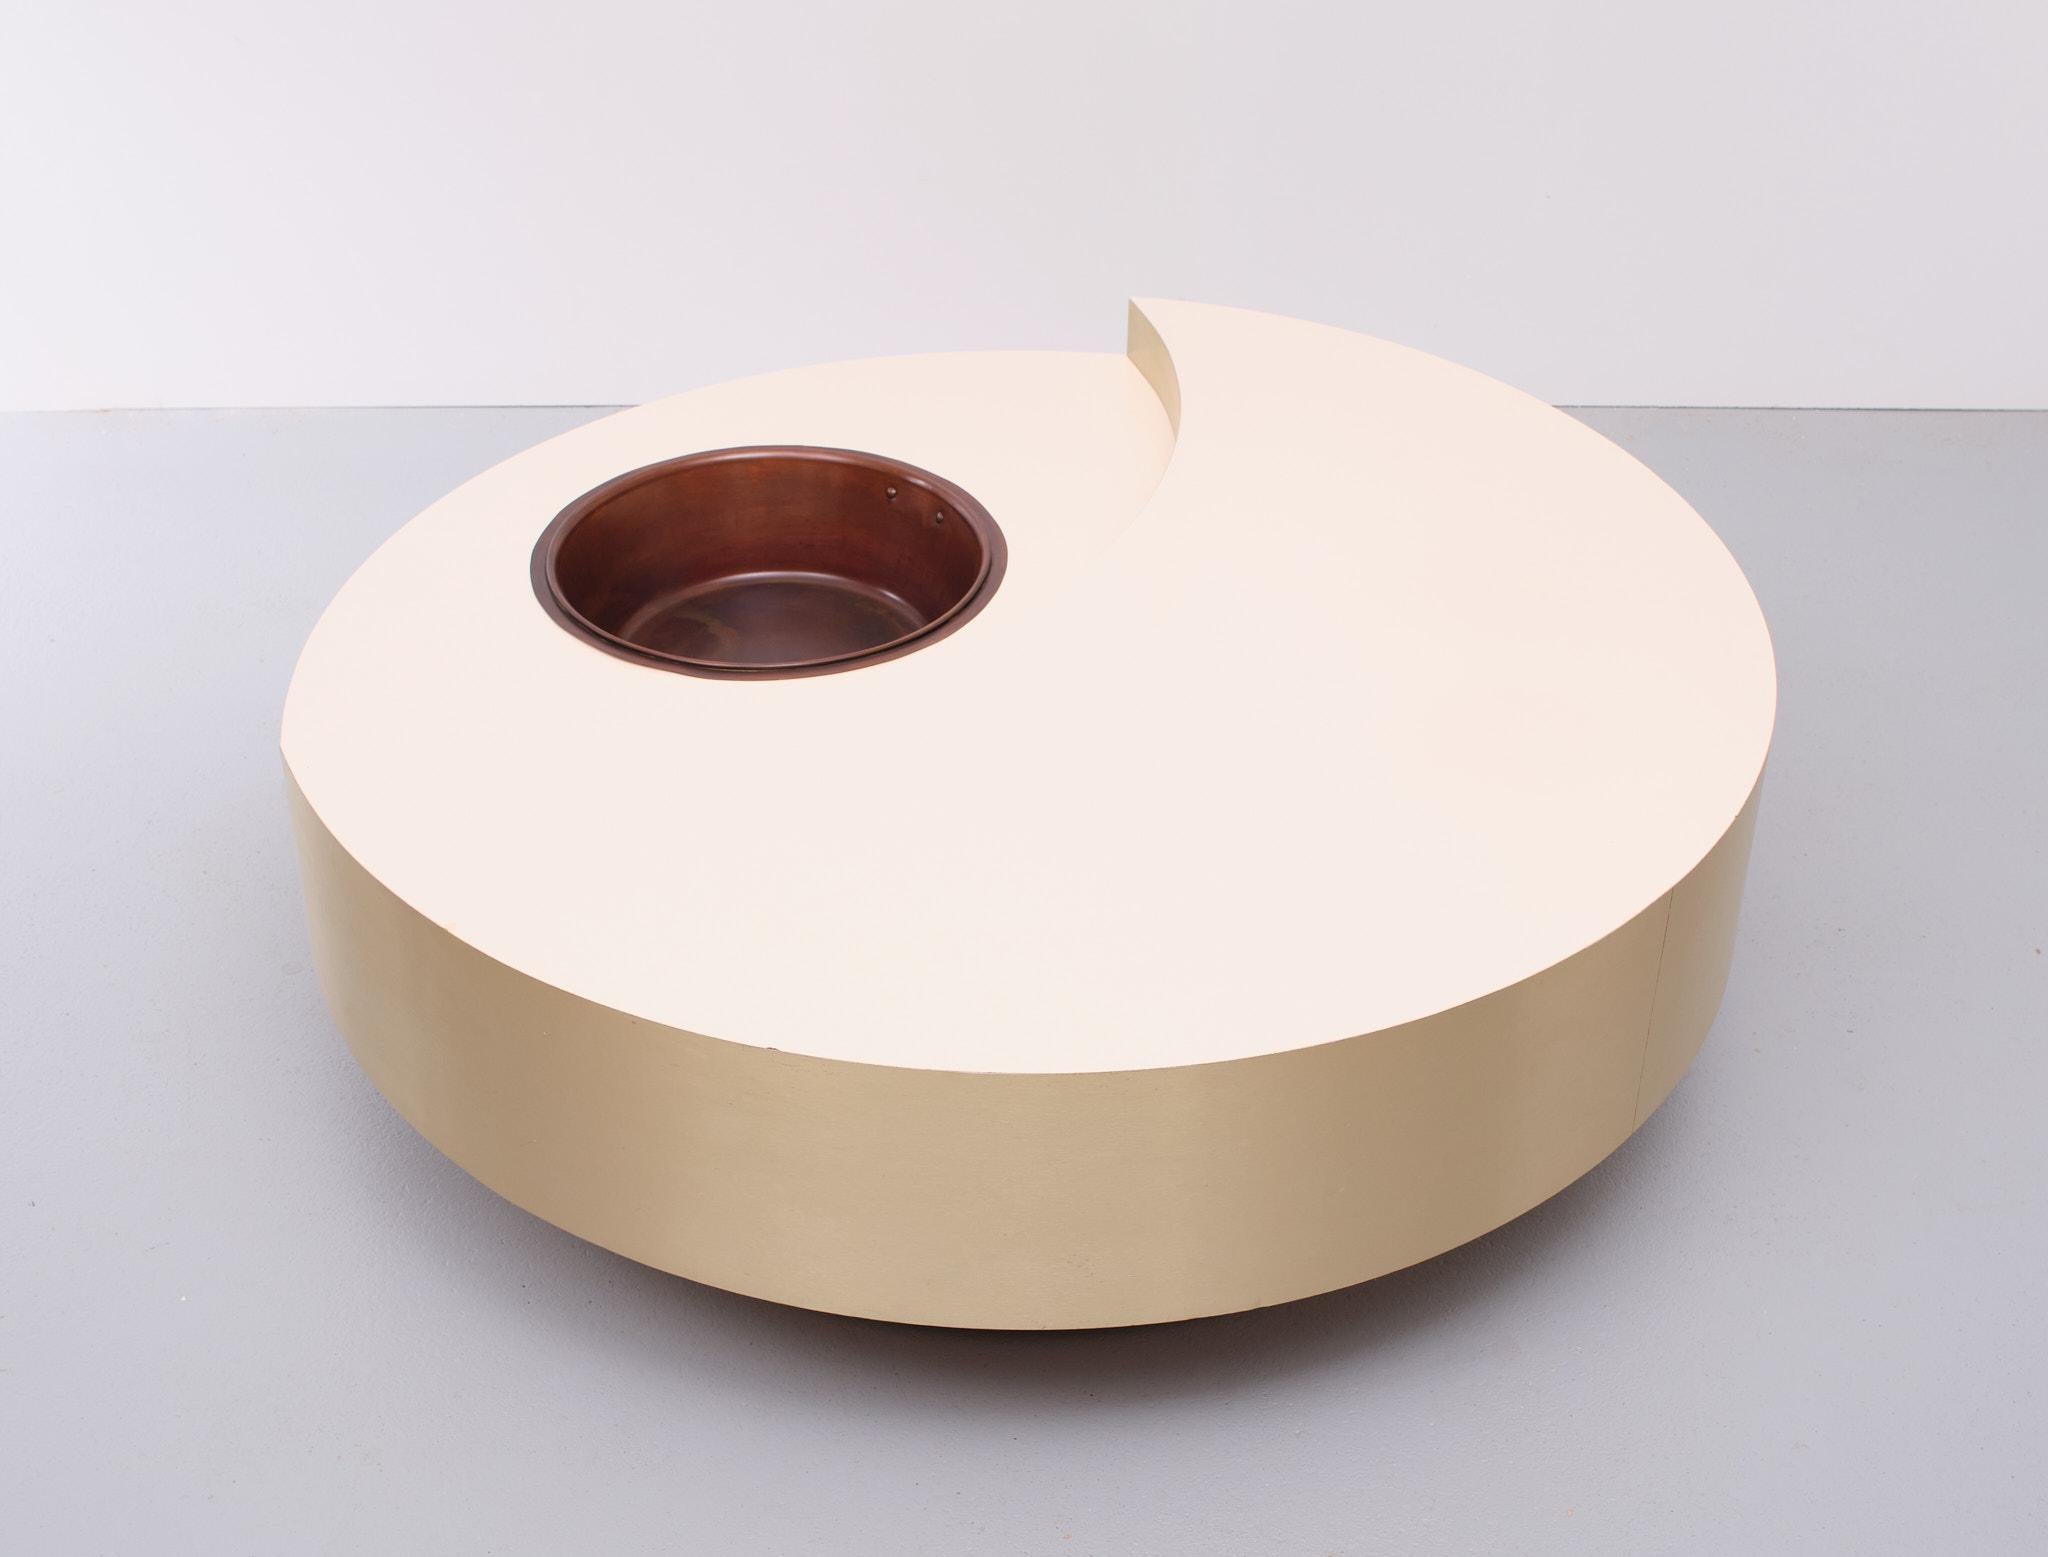 A stunning circular revolving table by designer and artist Willy Rizzo. This table is made in an attractive cream-white and ‘glamorous’ brass accent combination. Very desirable and luxury piece of furniture; Rizzo regretted the upcoming flow of mass